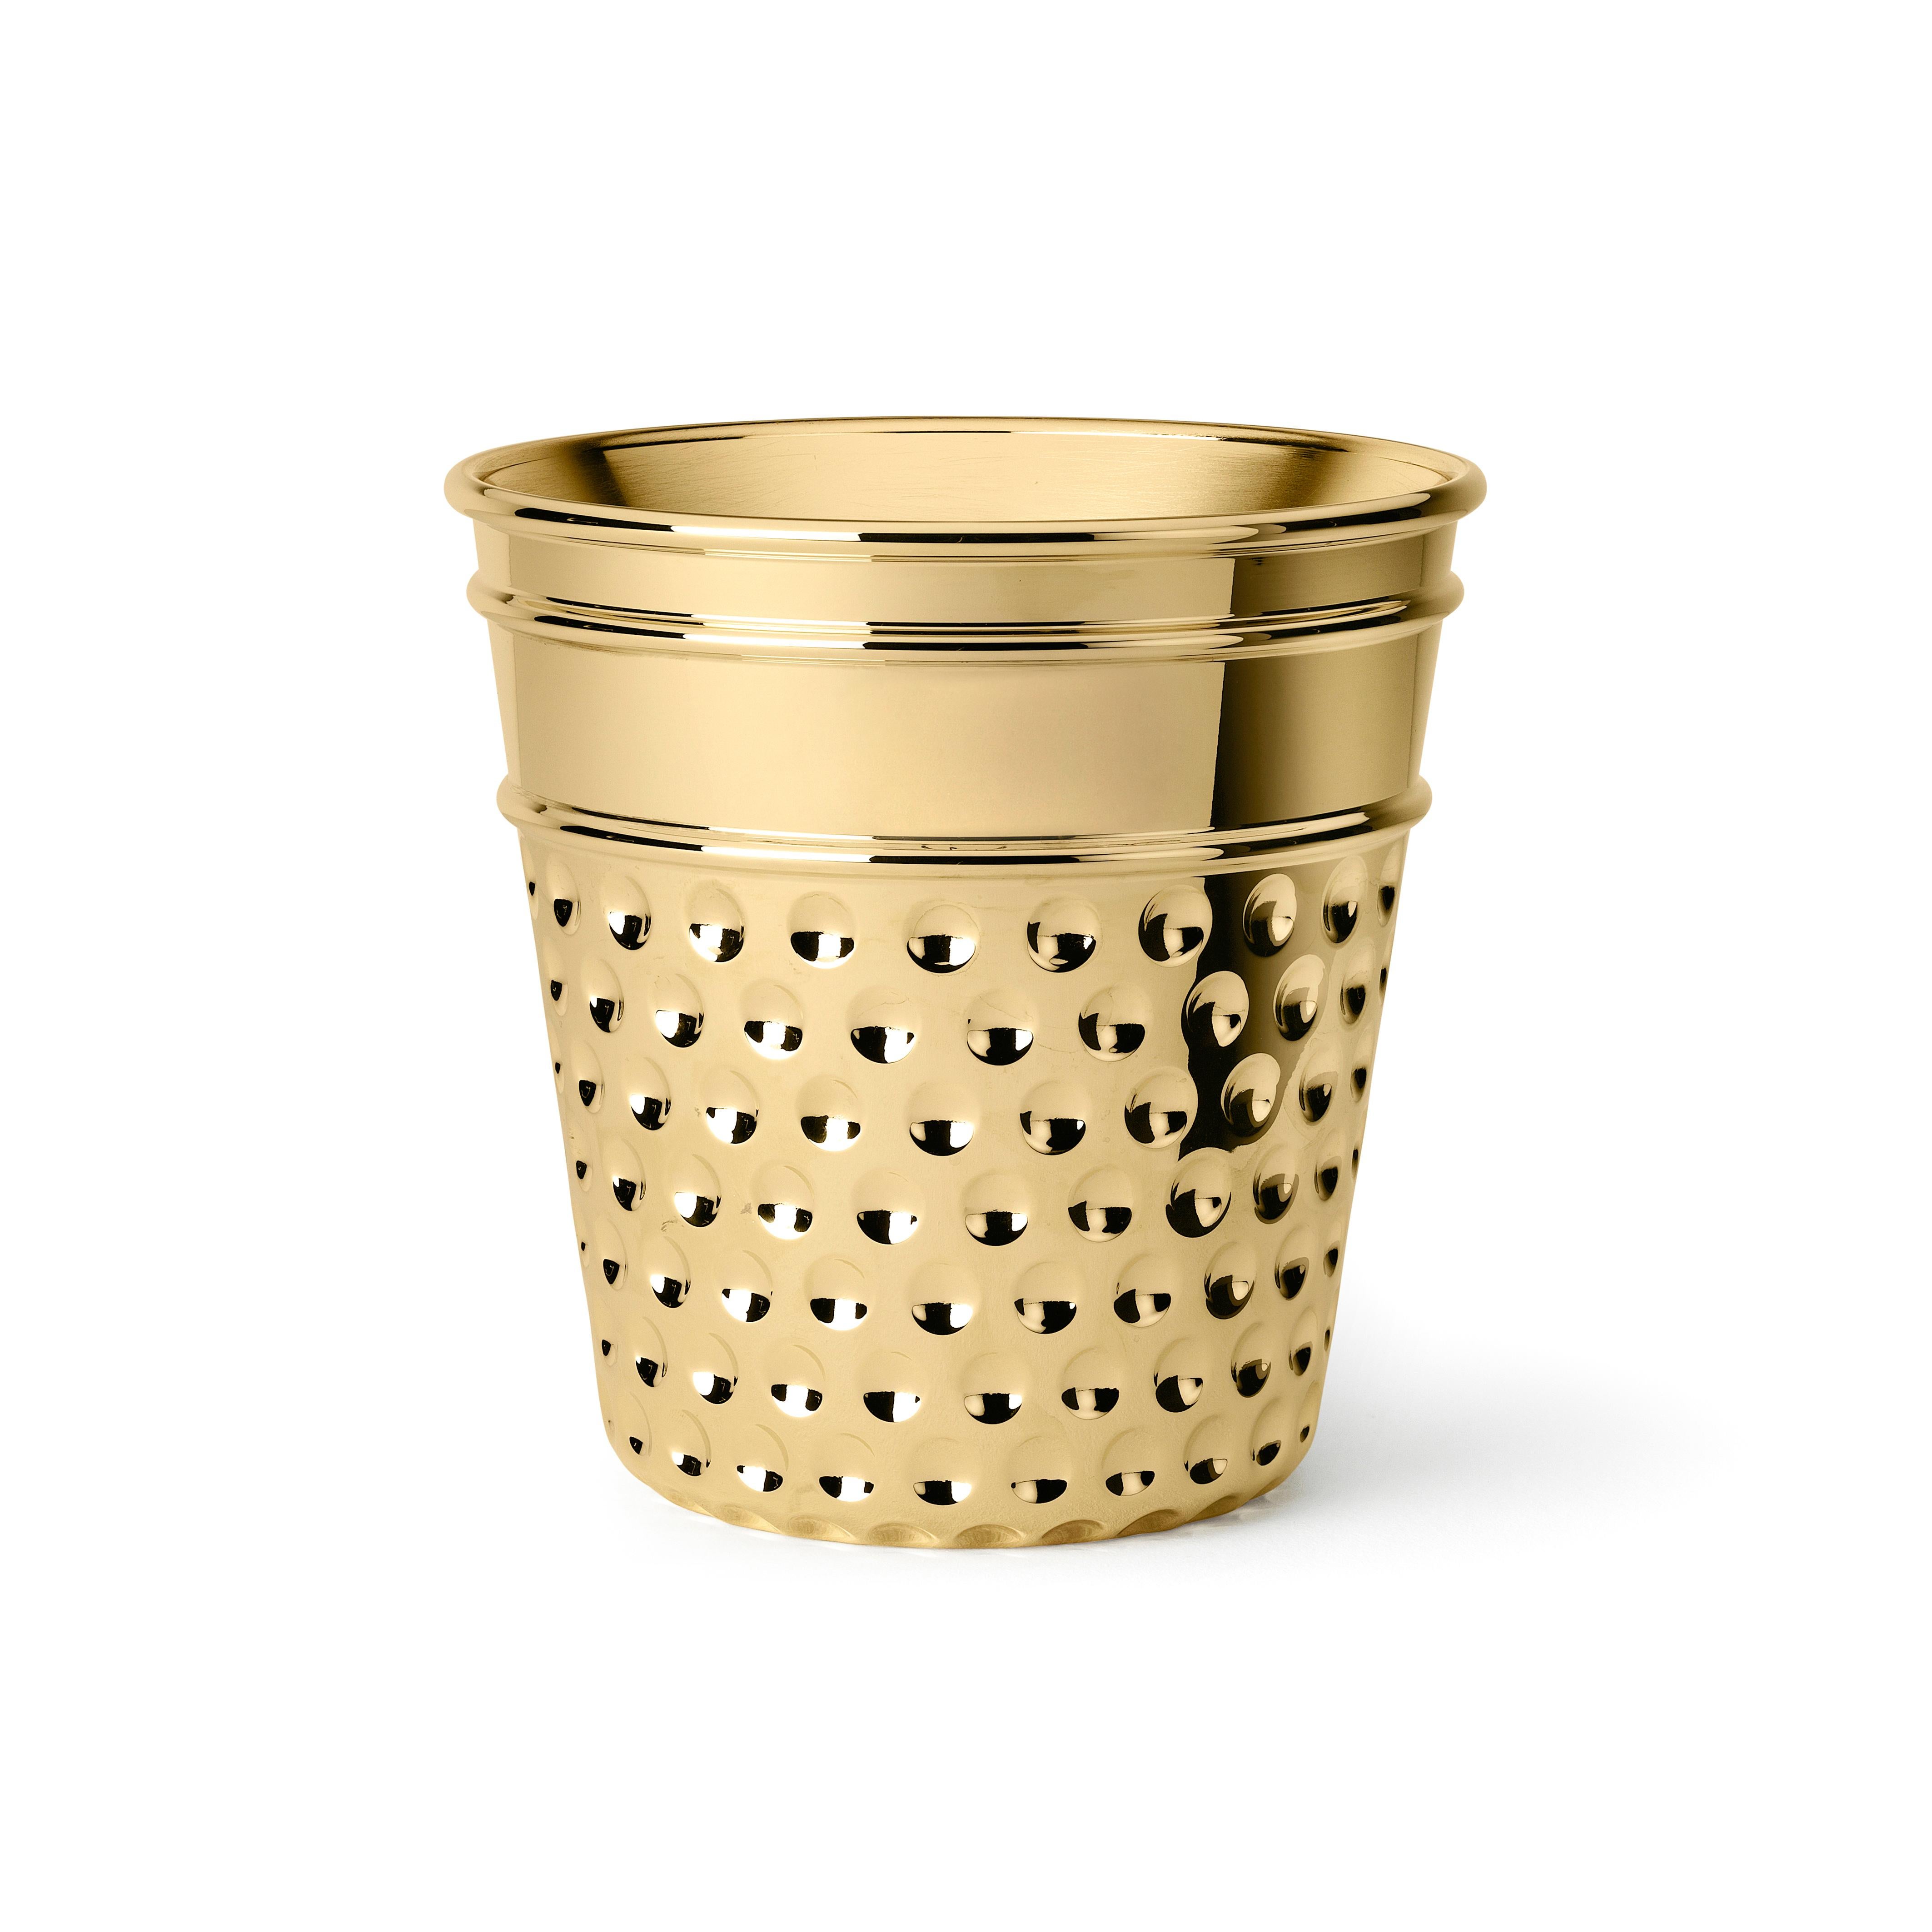 Ice bucket in casted brass. For this supreme ice bucket Studio Job got inspirations by family tailoring traditions and care of the smallest details. The here ice bucket is then represented by a gigantic thimble with etchings.